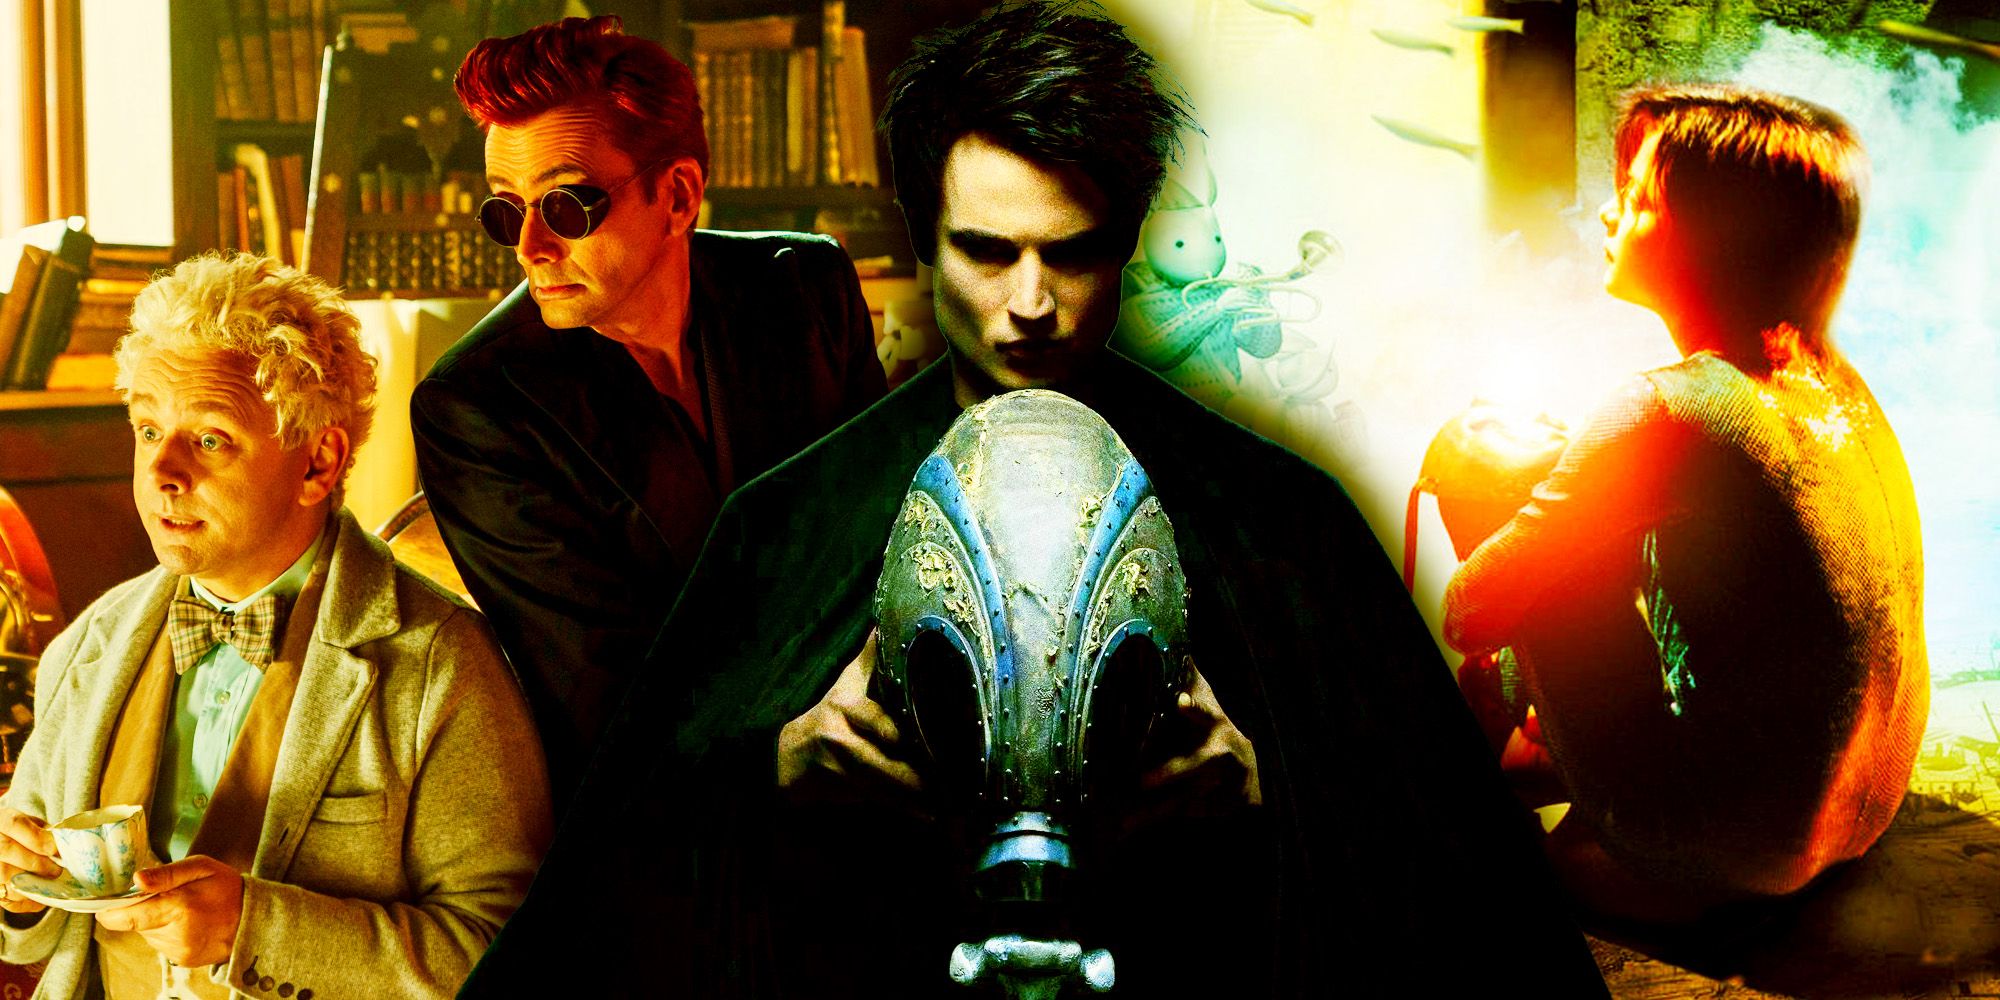 An image of David Tennant Michael Sheen and Tom Sturridge in their Gaiman projects